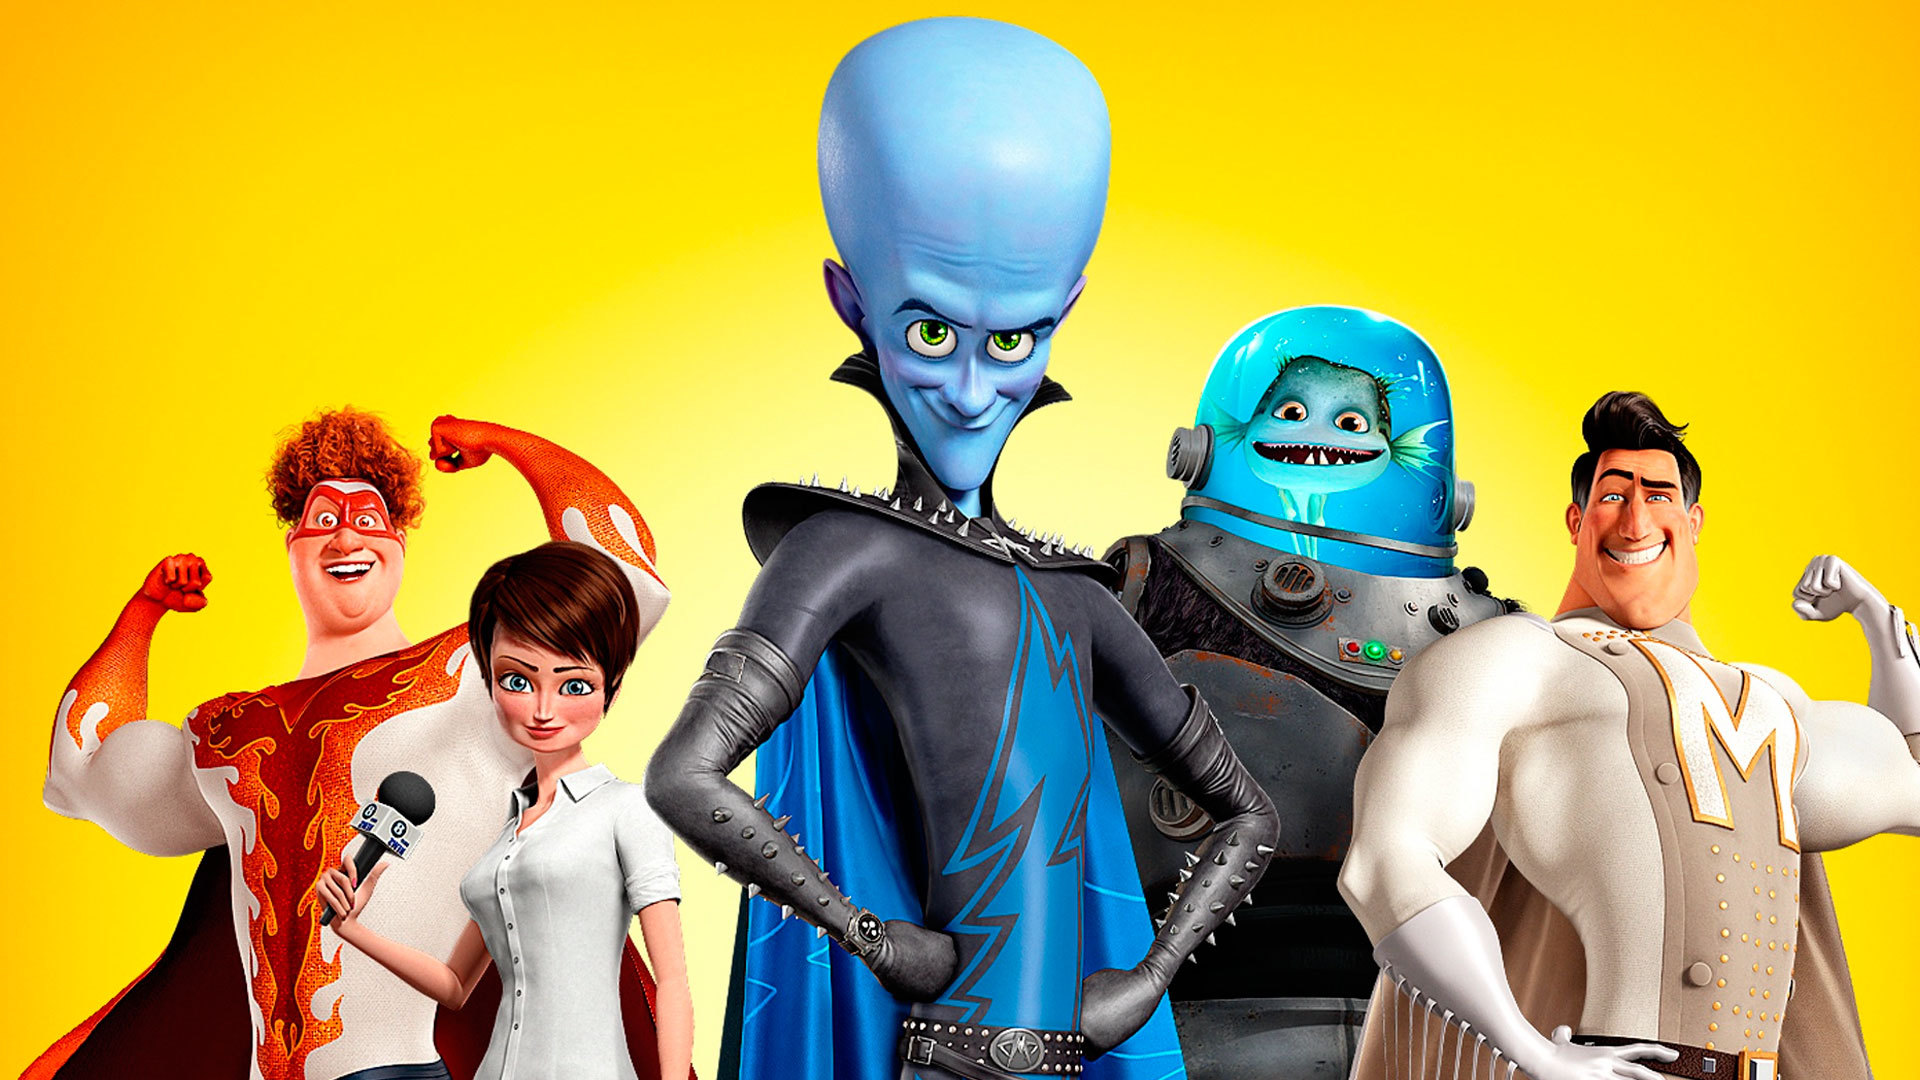 Megamind wallpapers and images - wallpapers, pictures, photos